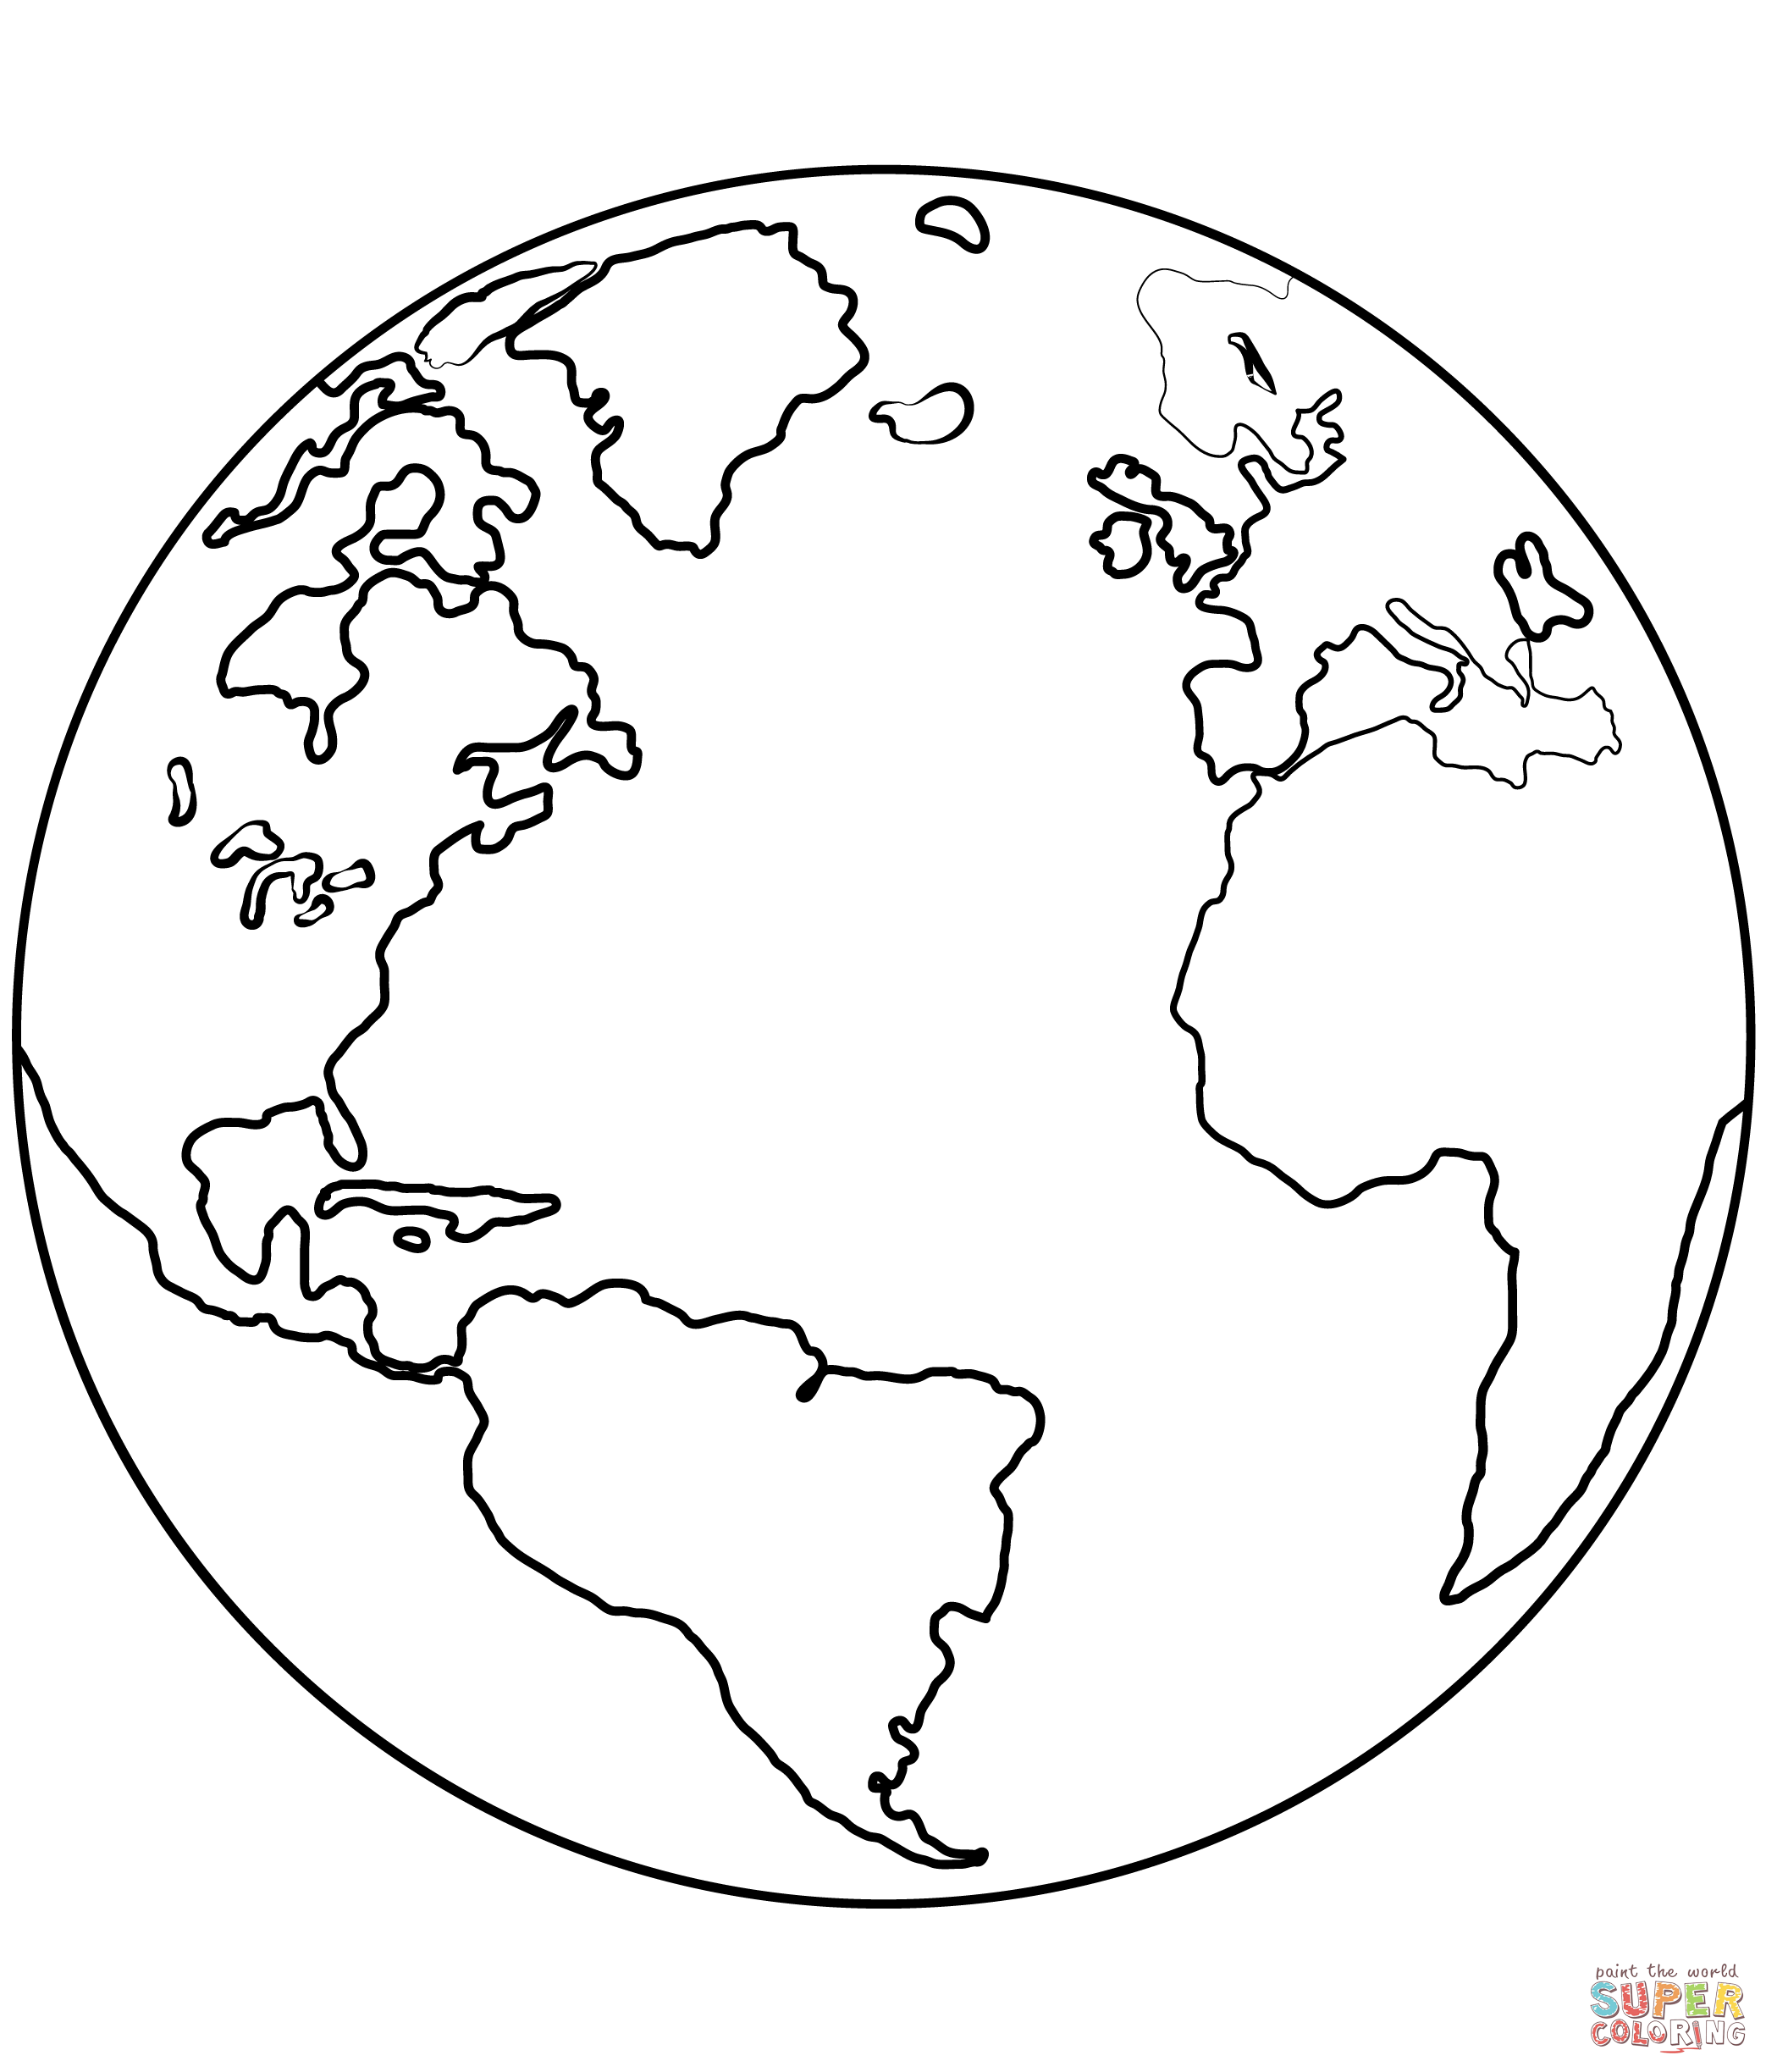 Earth Coloring Page   Free Printable Coloring Pages   Coloring Home